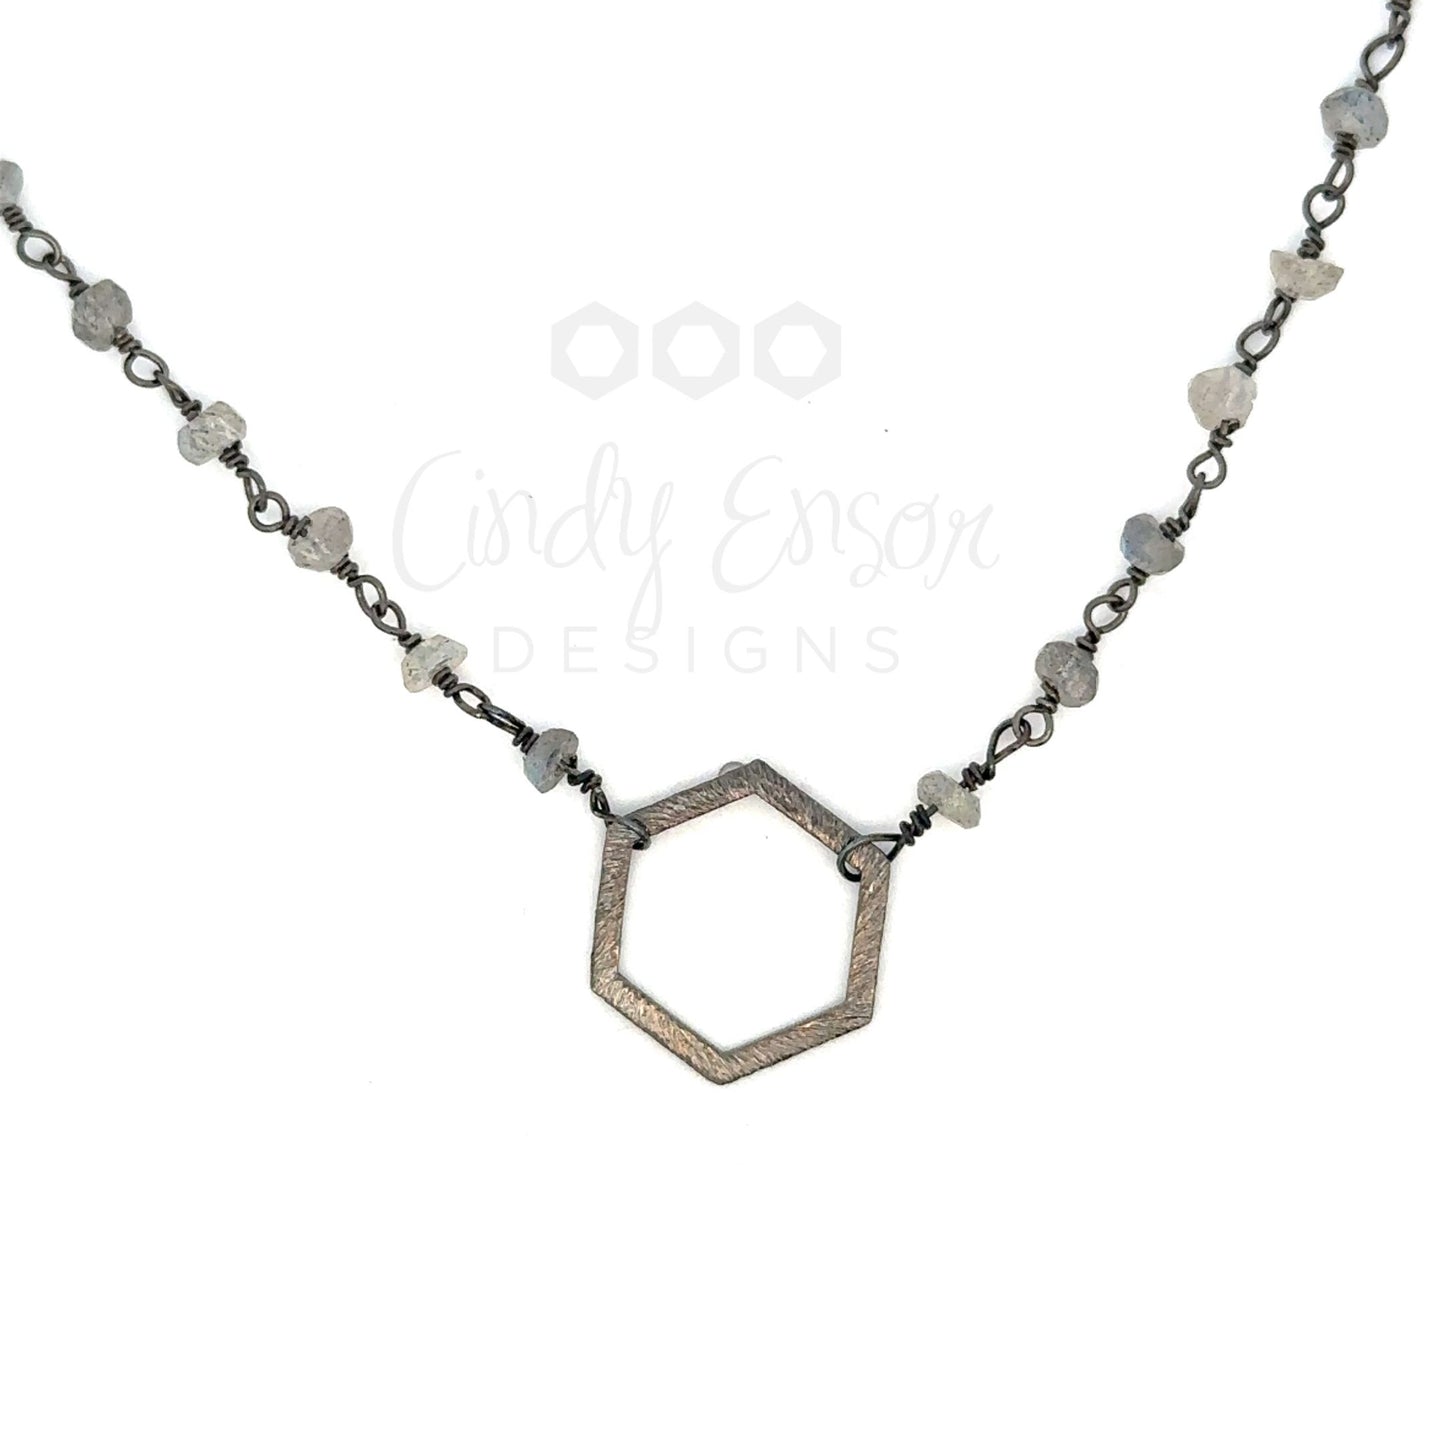 Labradorite Chain Necklace with Sterling Geometric Accent